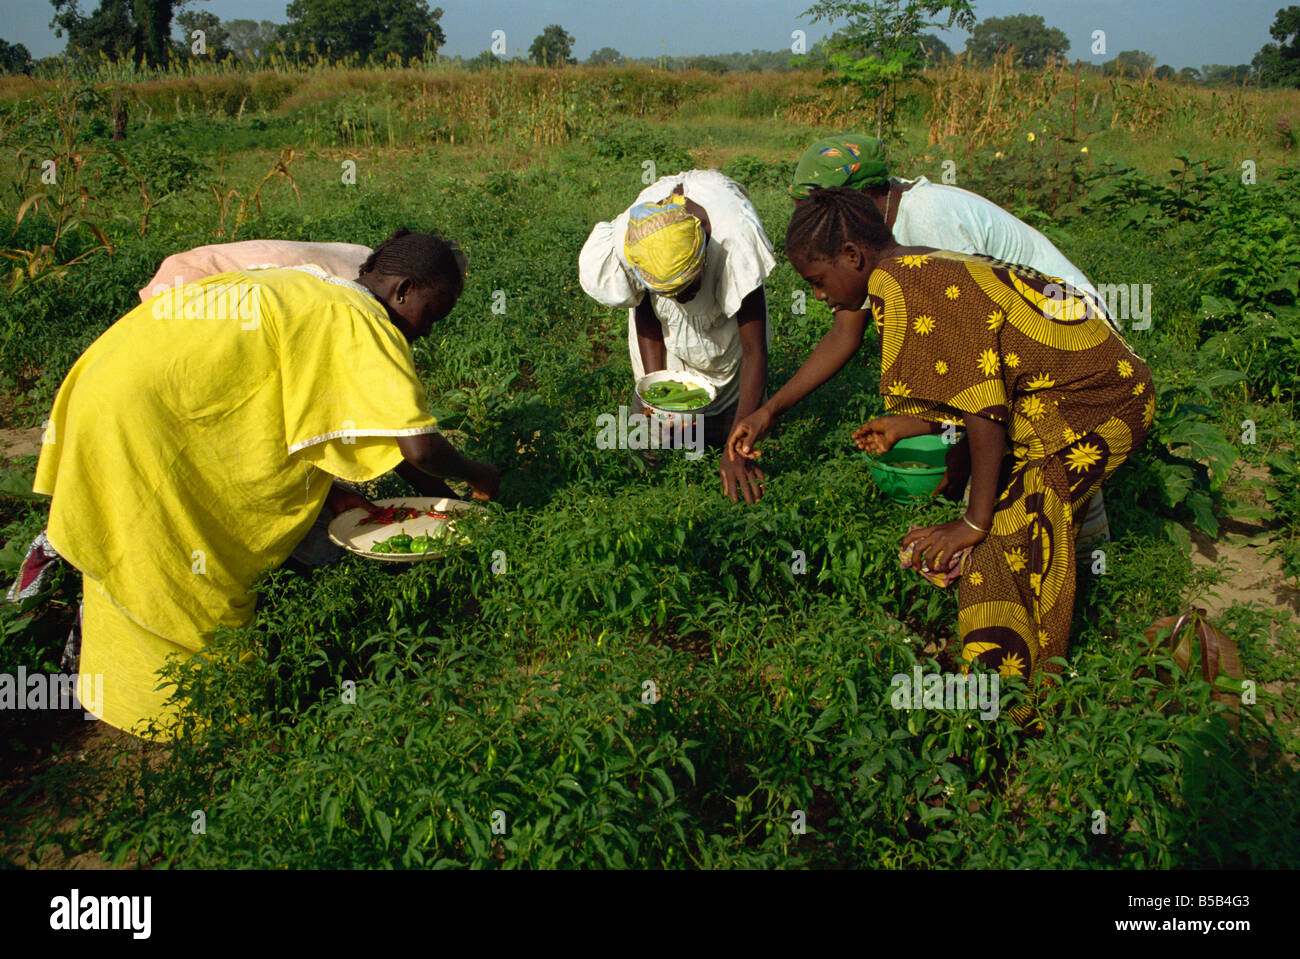 Picking peppers, The Gambia, West Africa, Africa Stock Photo